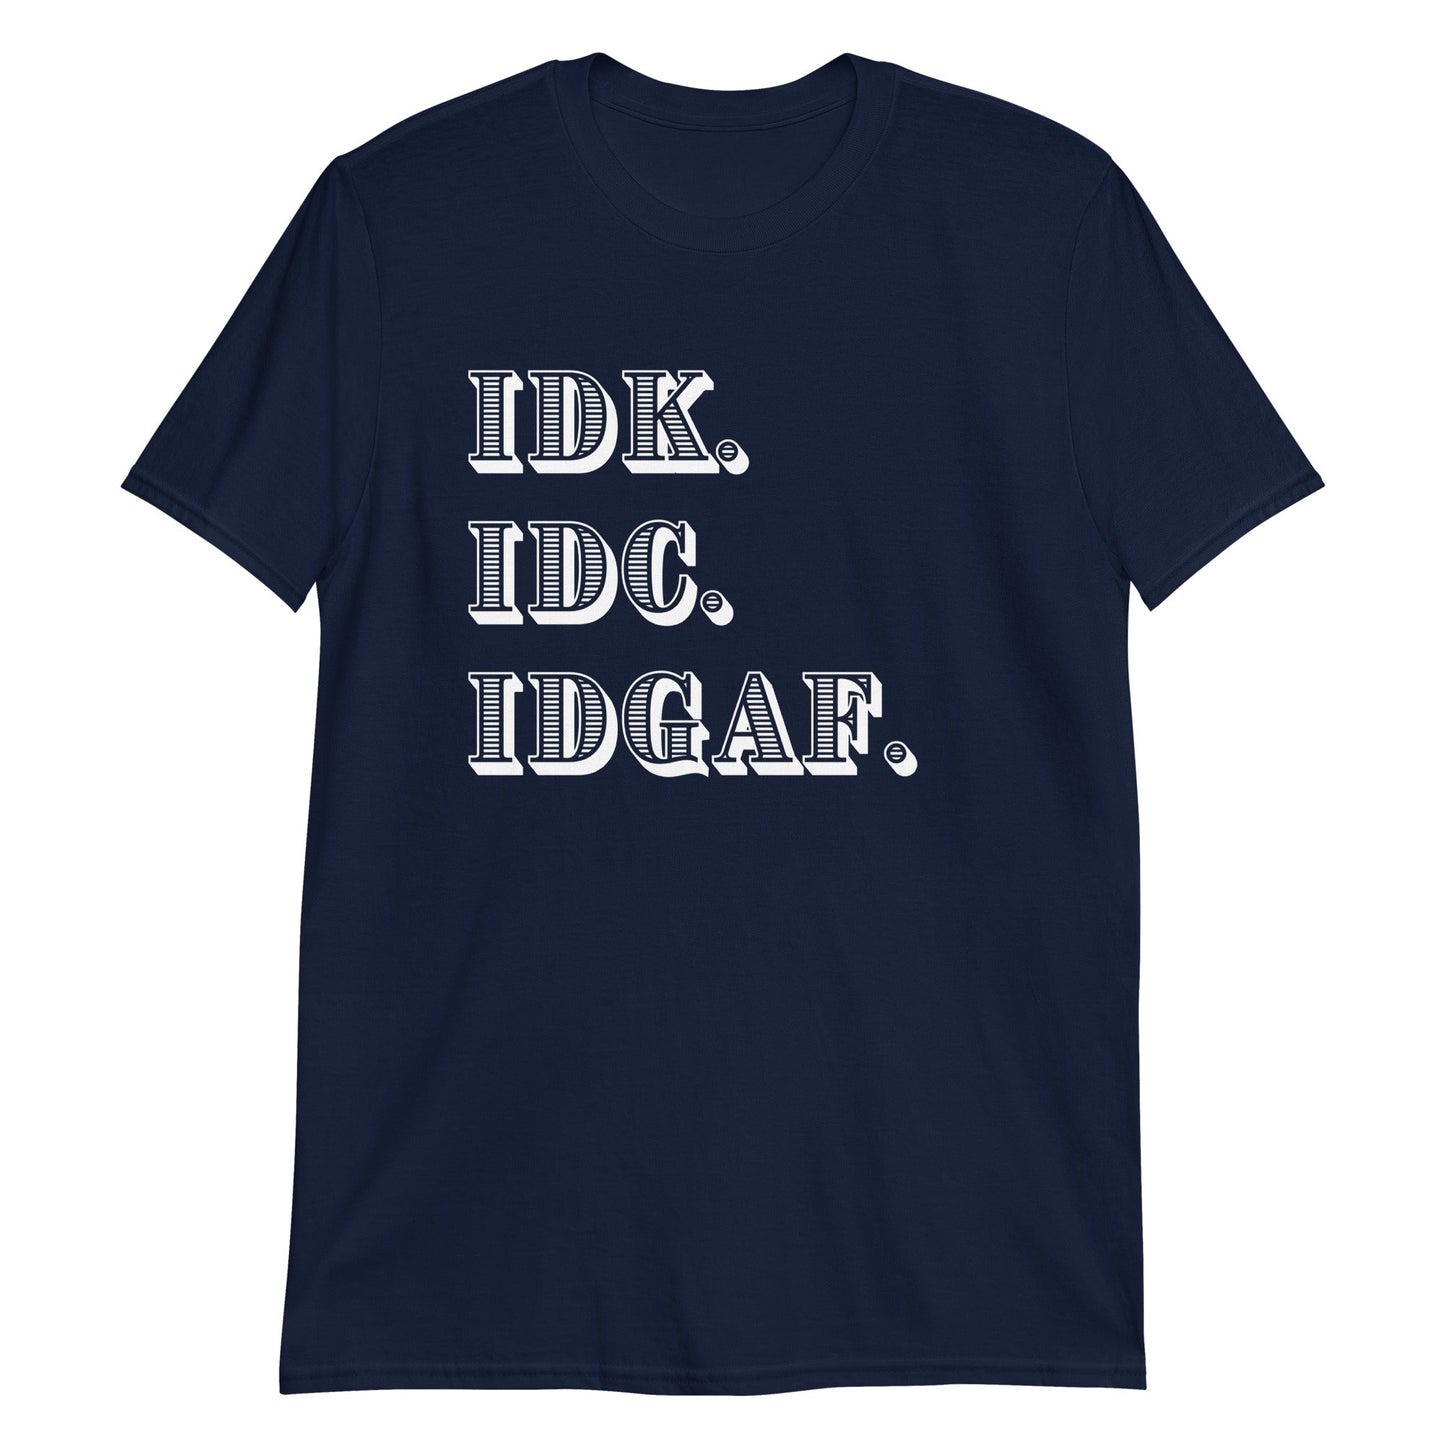 IDK. IDC. IDGAF Short-Sleeve Unisex T-Shirt (For a Slim Fit Order a Size Down) - Catch This Tea Shirts